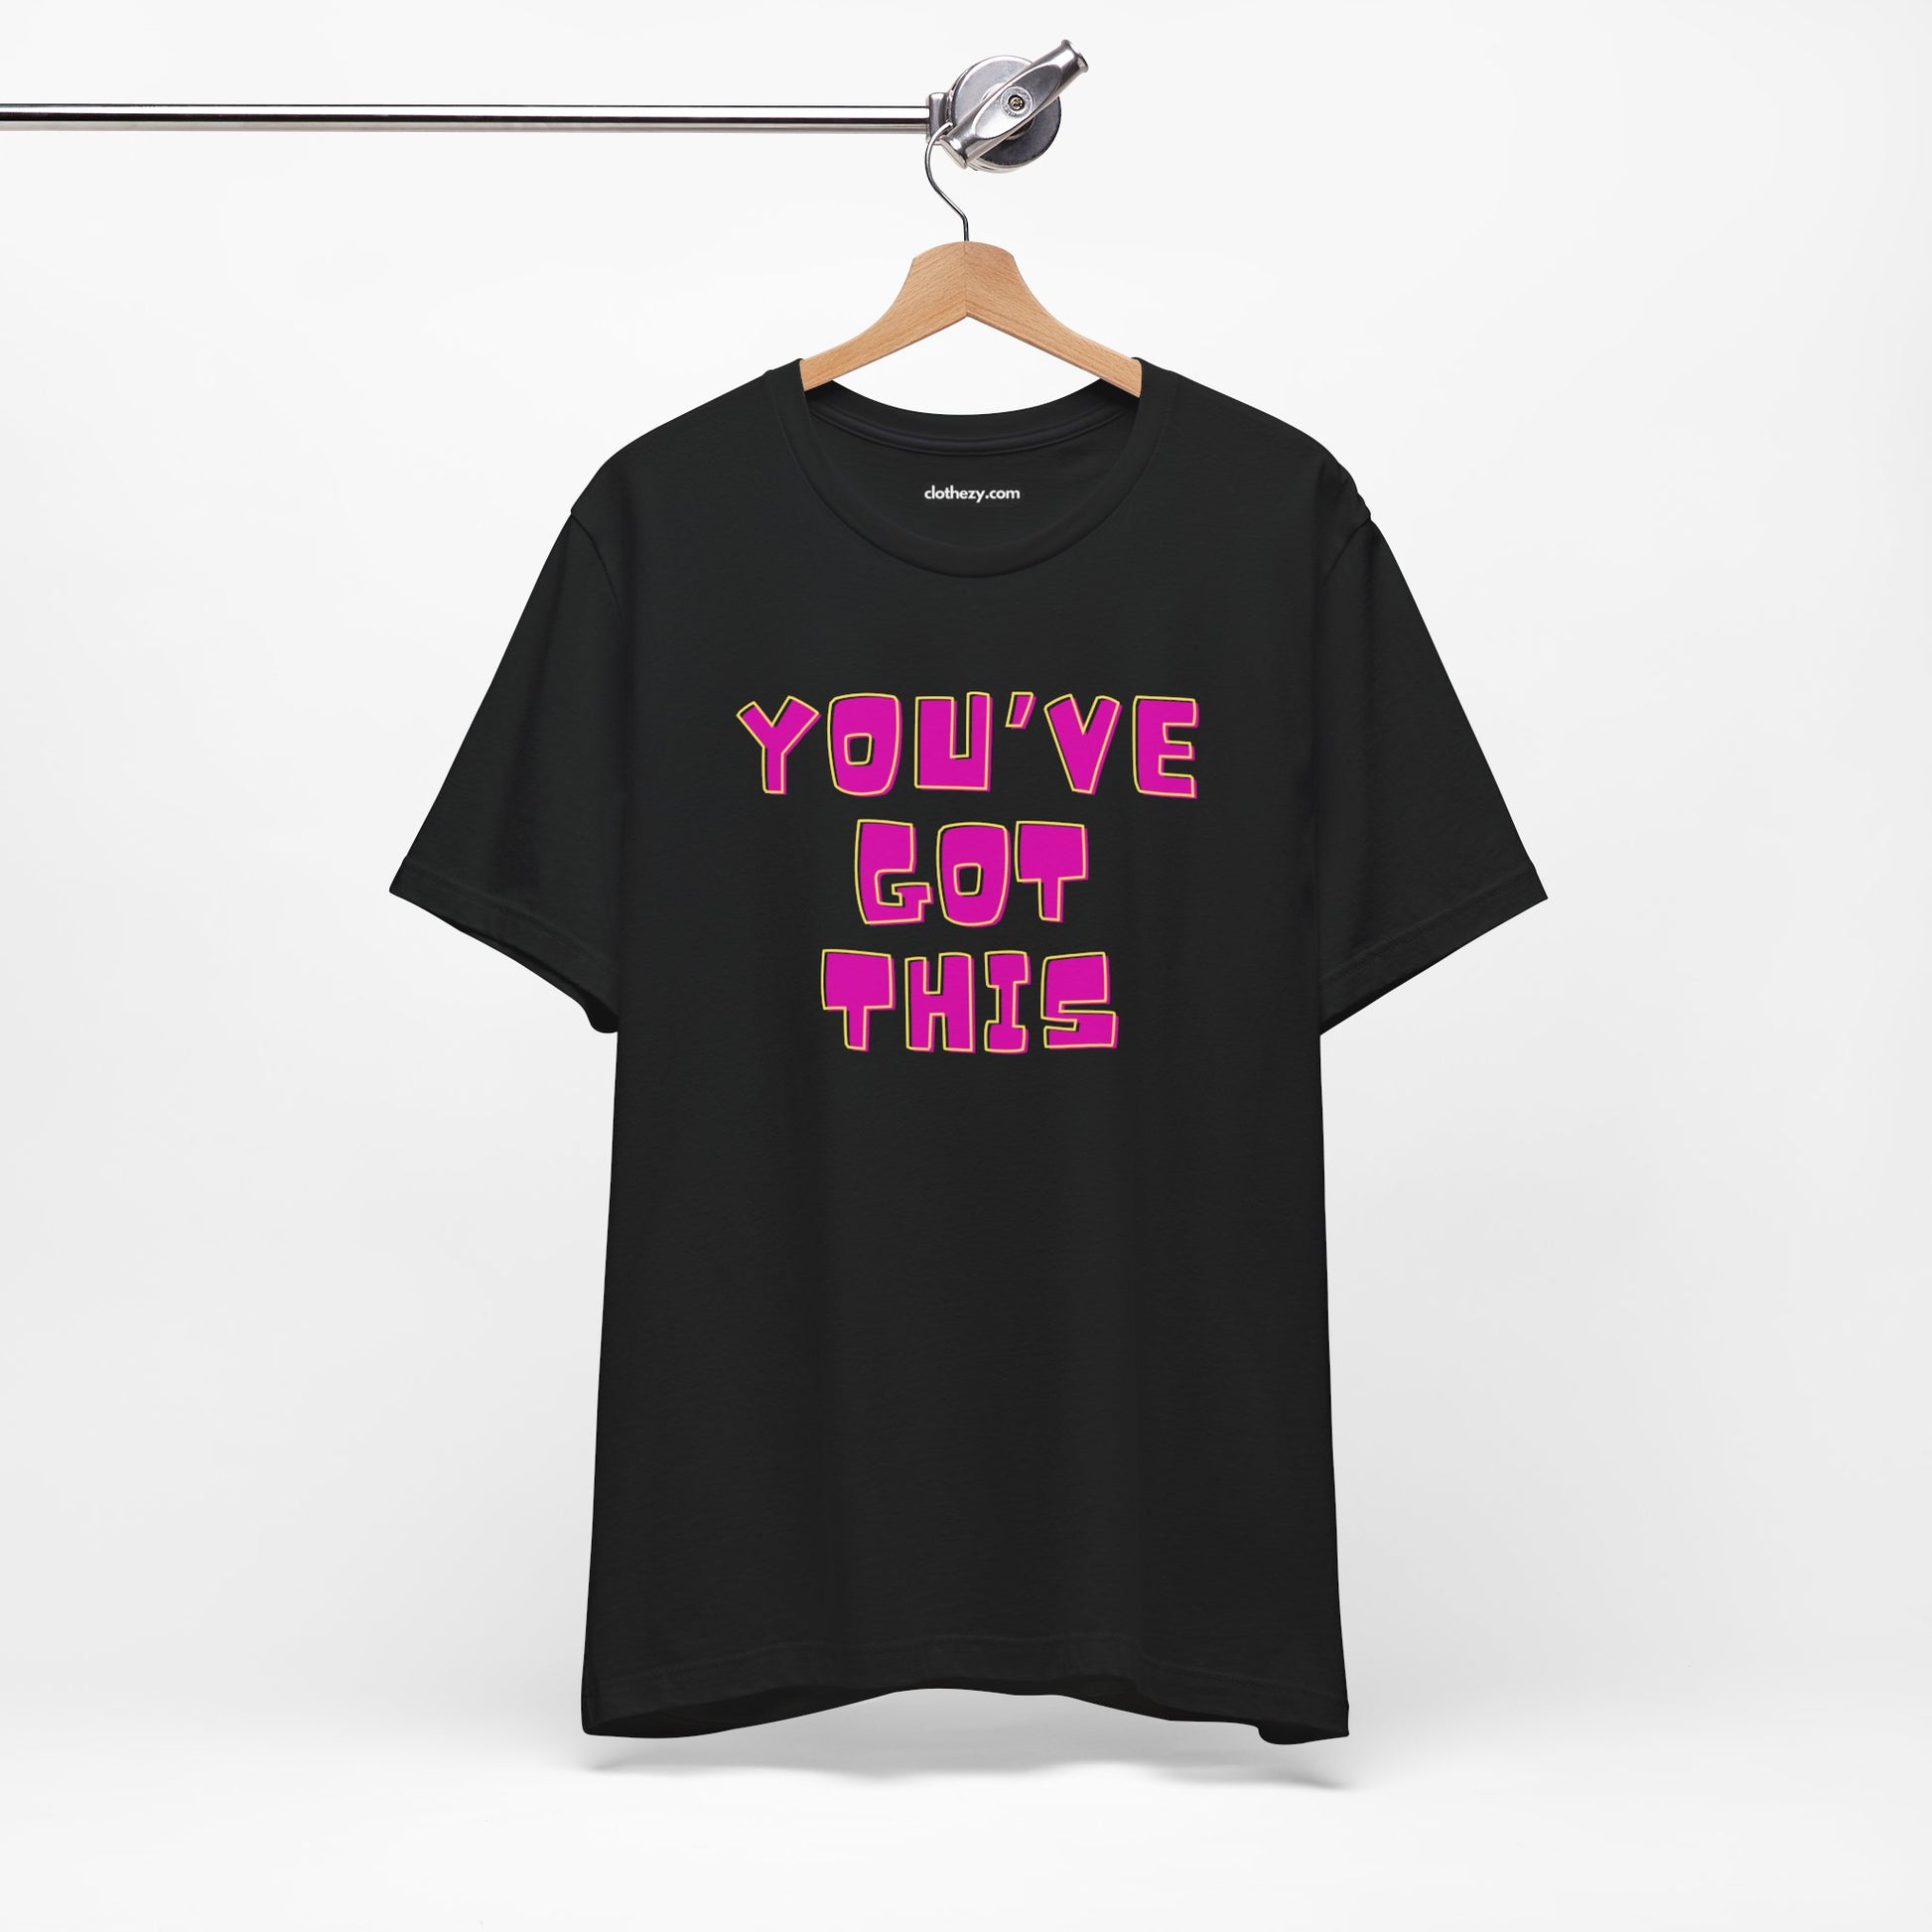 You've Got This - Soft Cotton Adult Unisex T-Shirt, Gift for friends and family, Gift for friends and family by clothezy.com - Buy Now